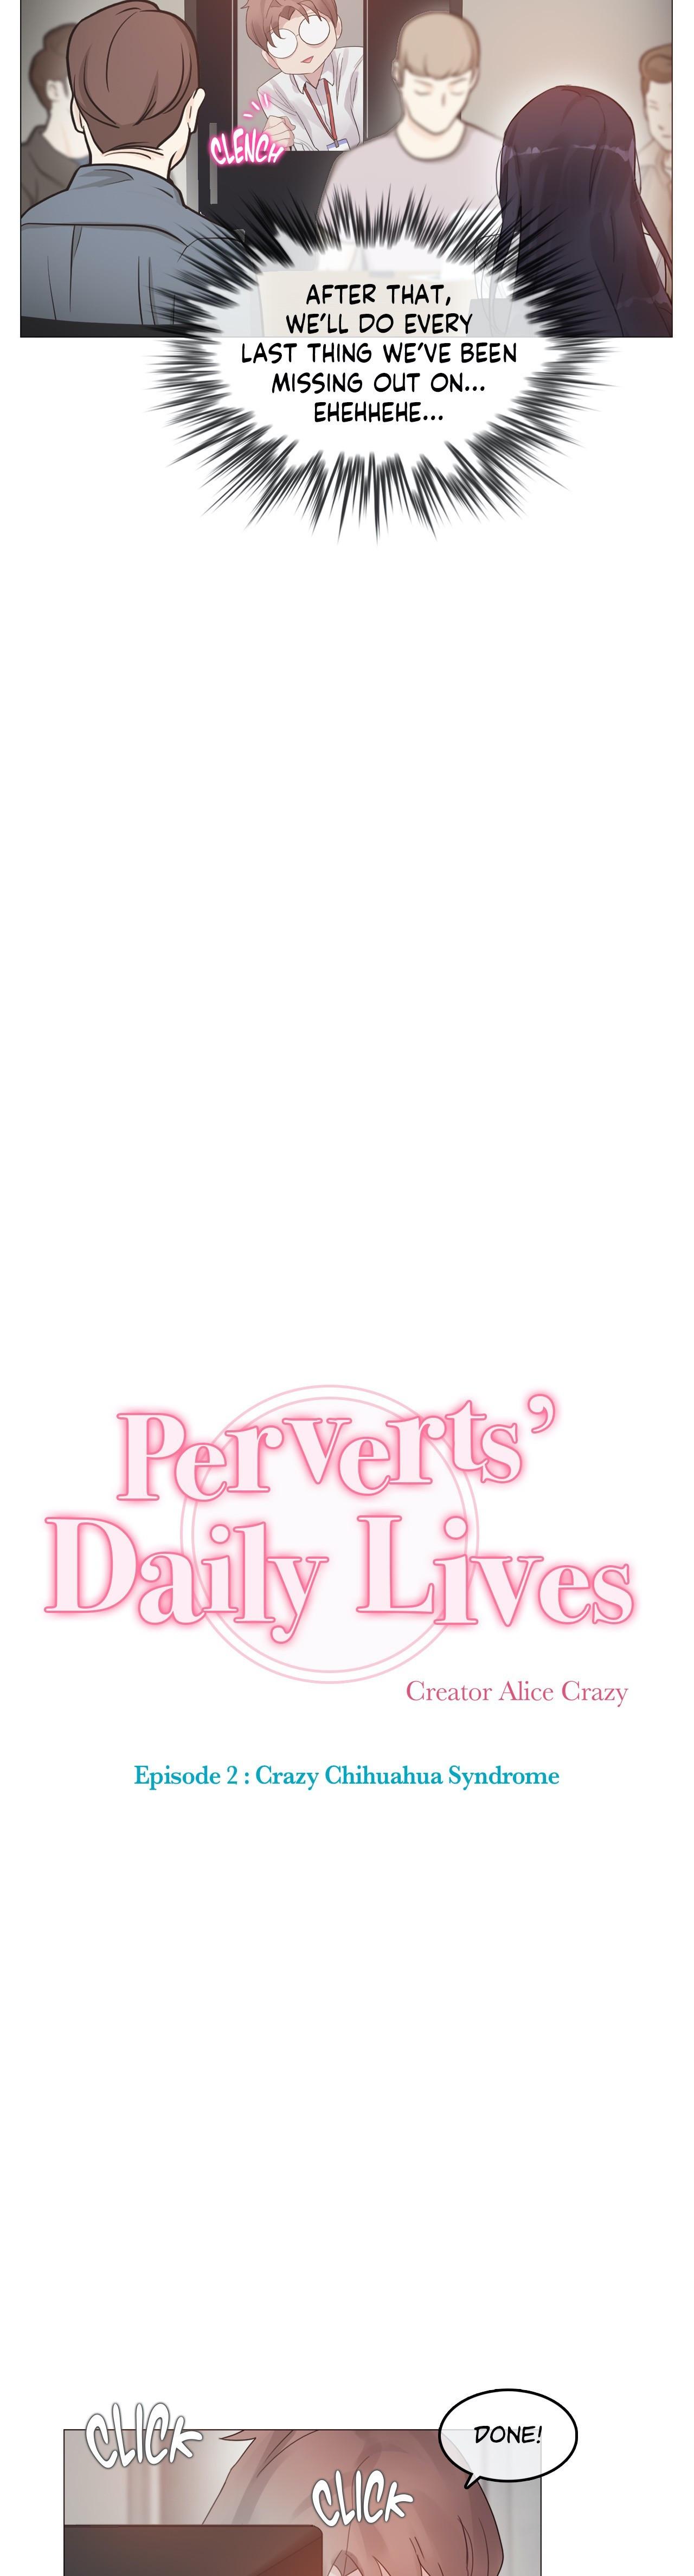 Perverts' Daily Lives Episode 2: Crazy Chihuahua Syndrome 313